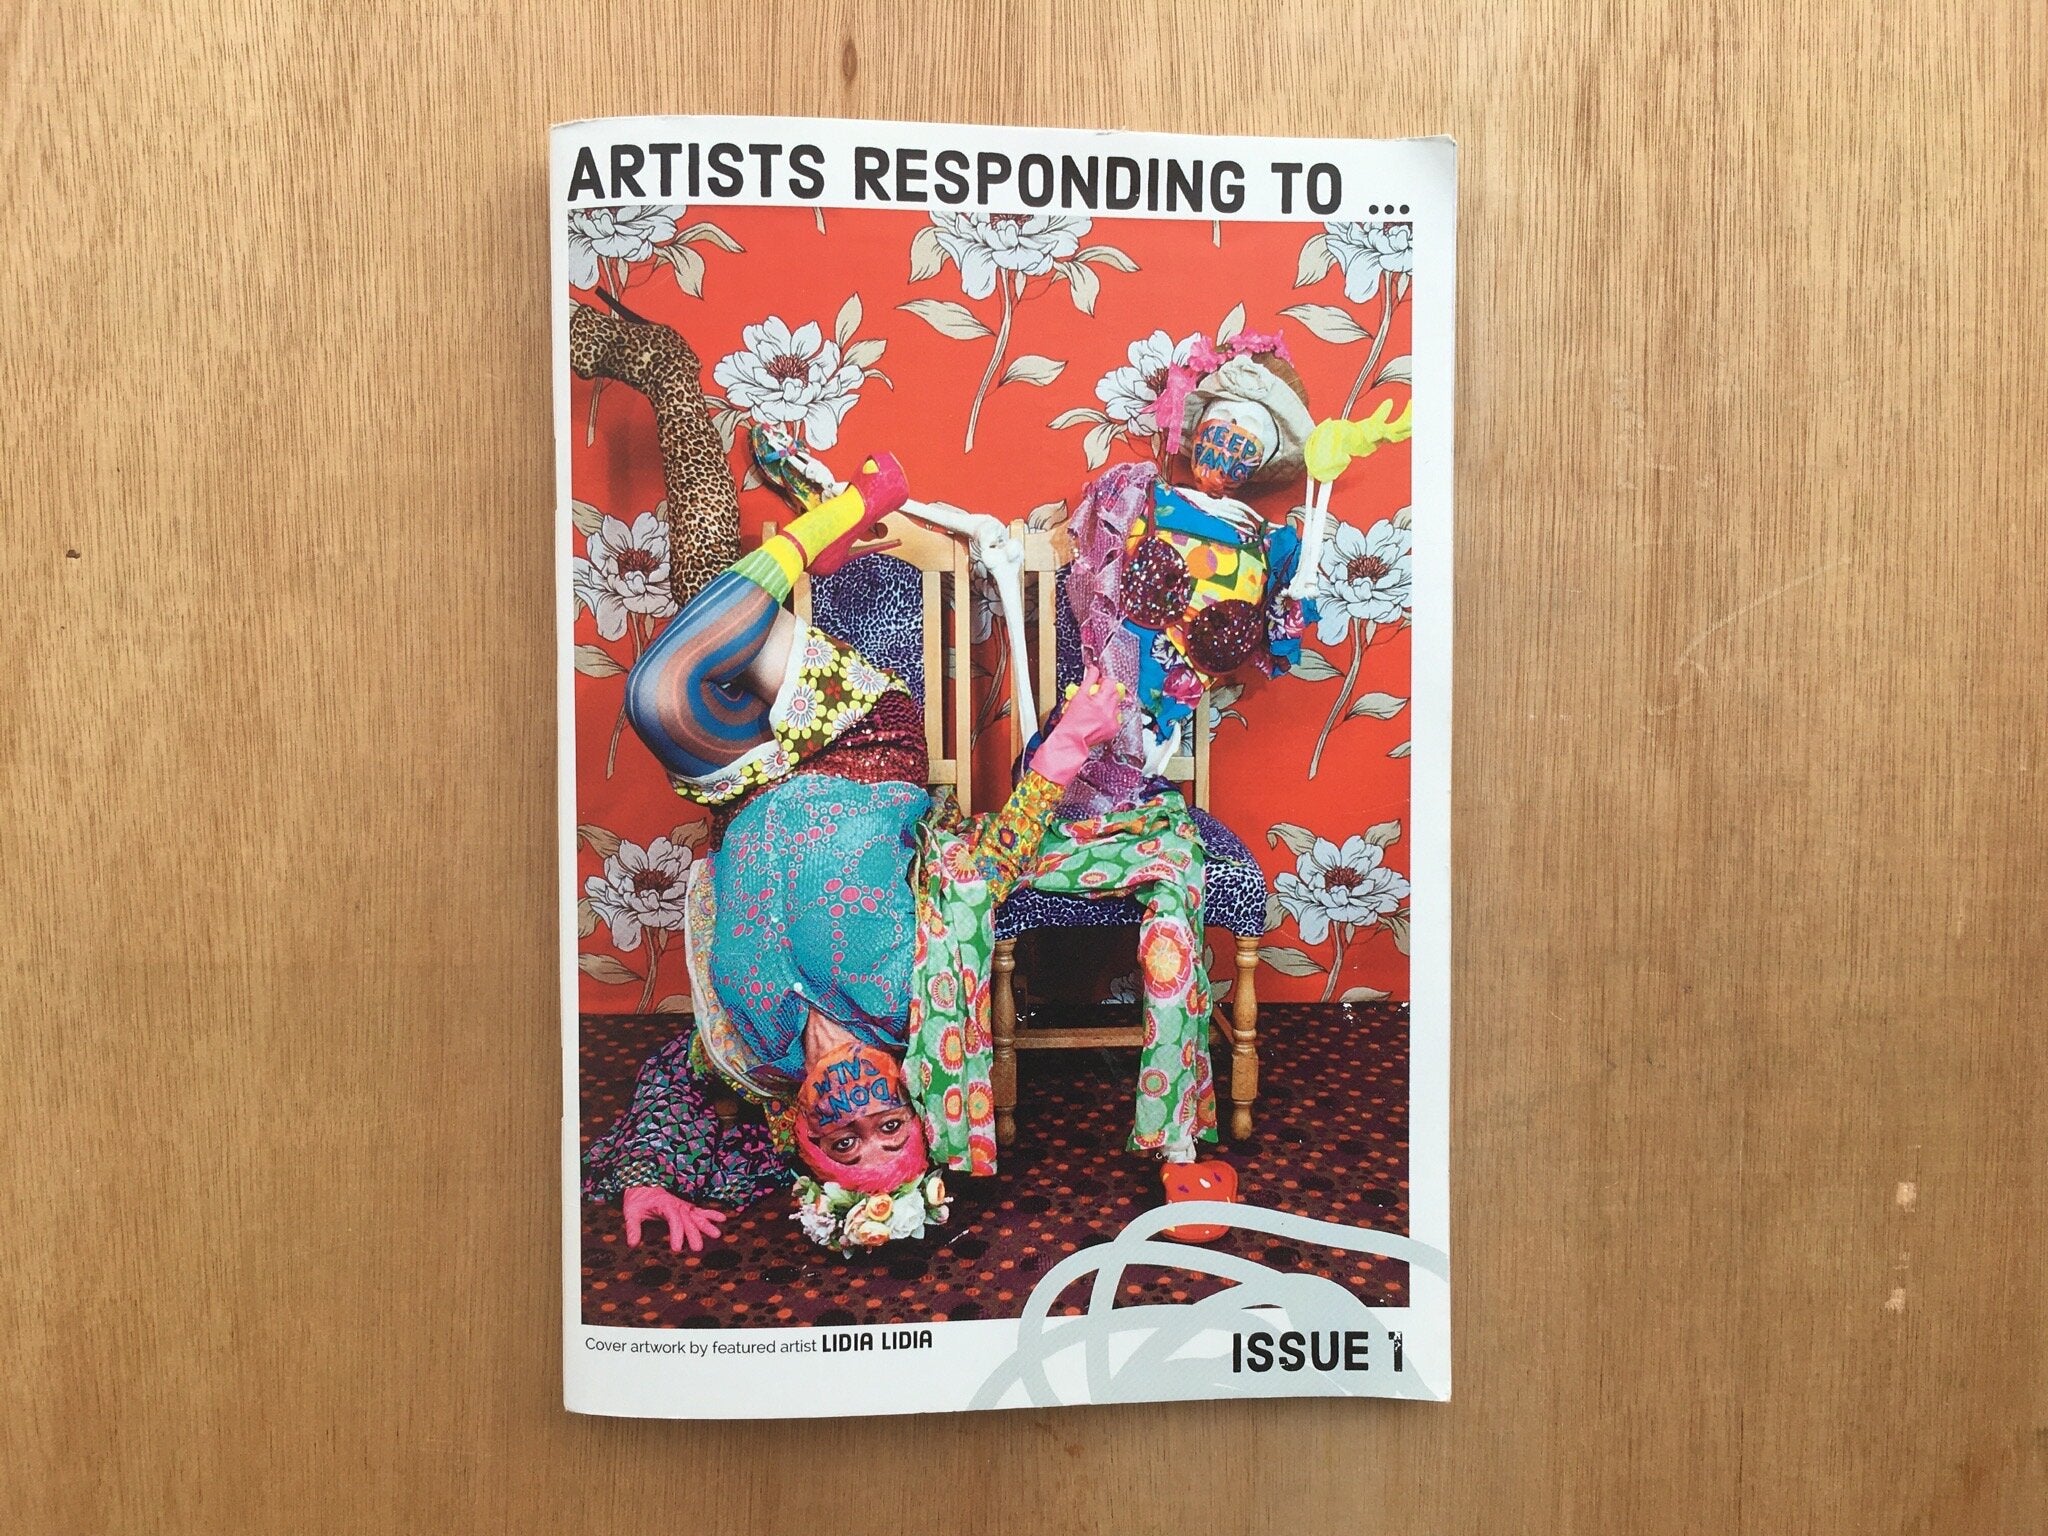 ARTISTS RESPONDING TO... ISSUE 1 by Various Artists